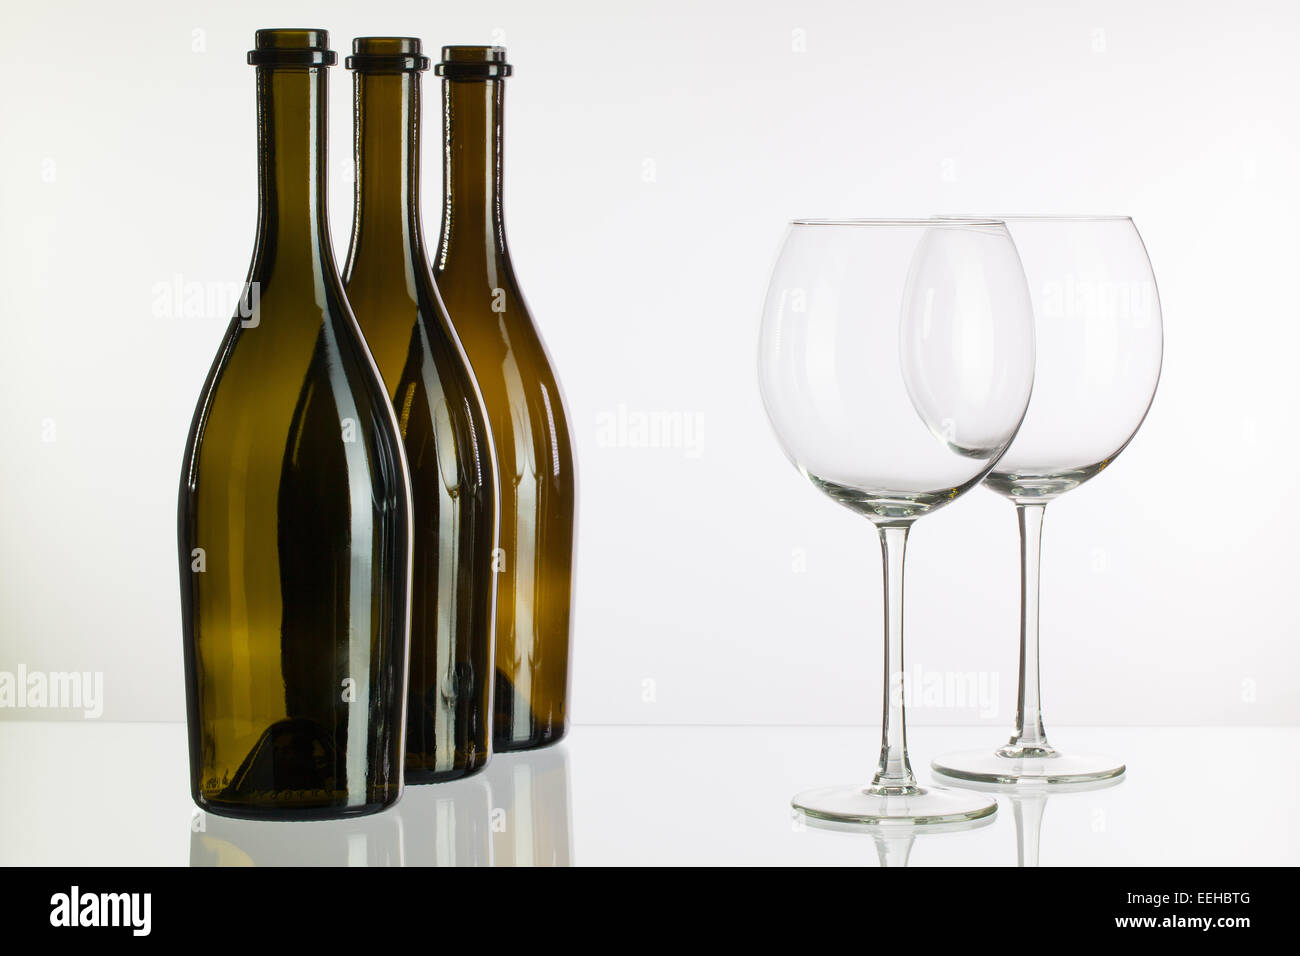 Three empty bottles of wine on a glass table Stock Photo